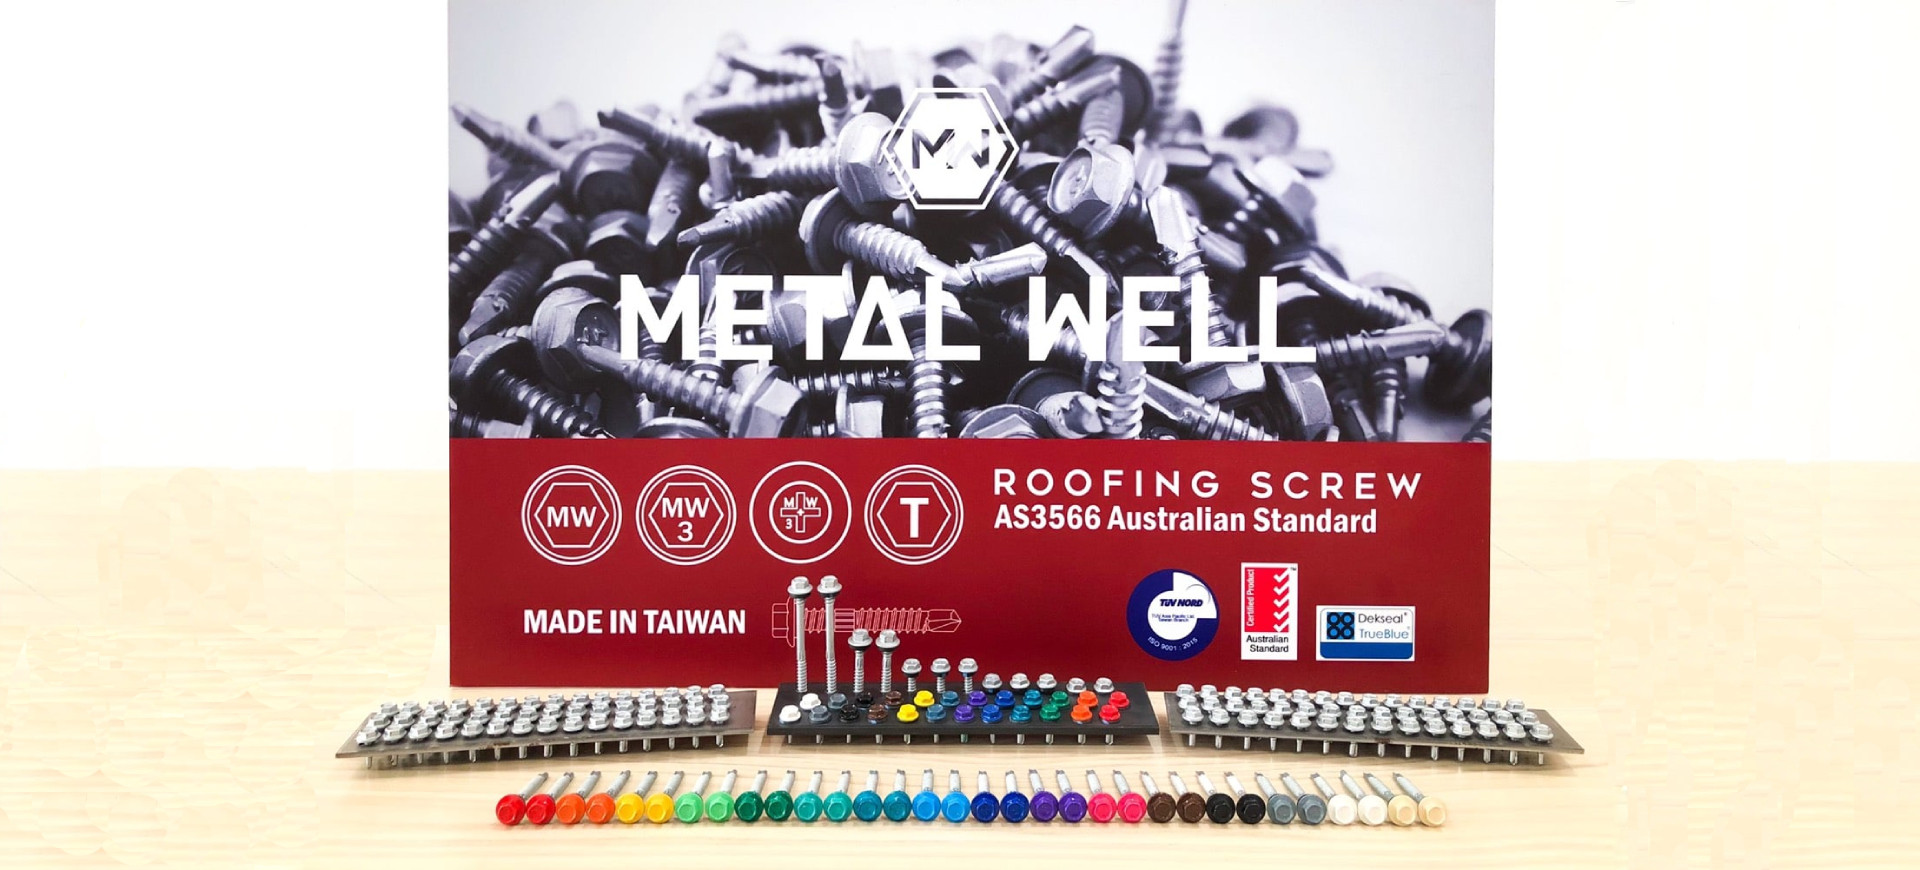 Metal Well Roofing Screw Made In Taiwan